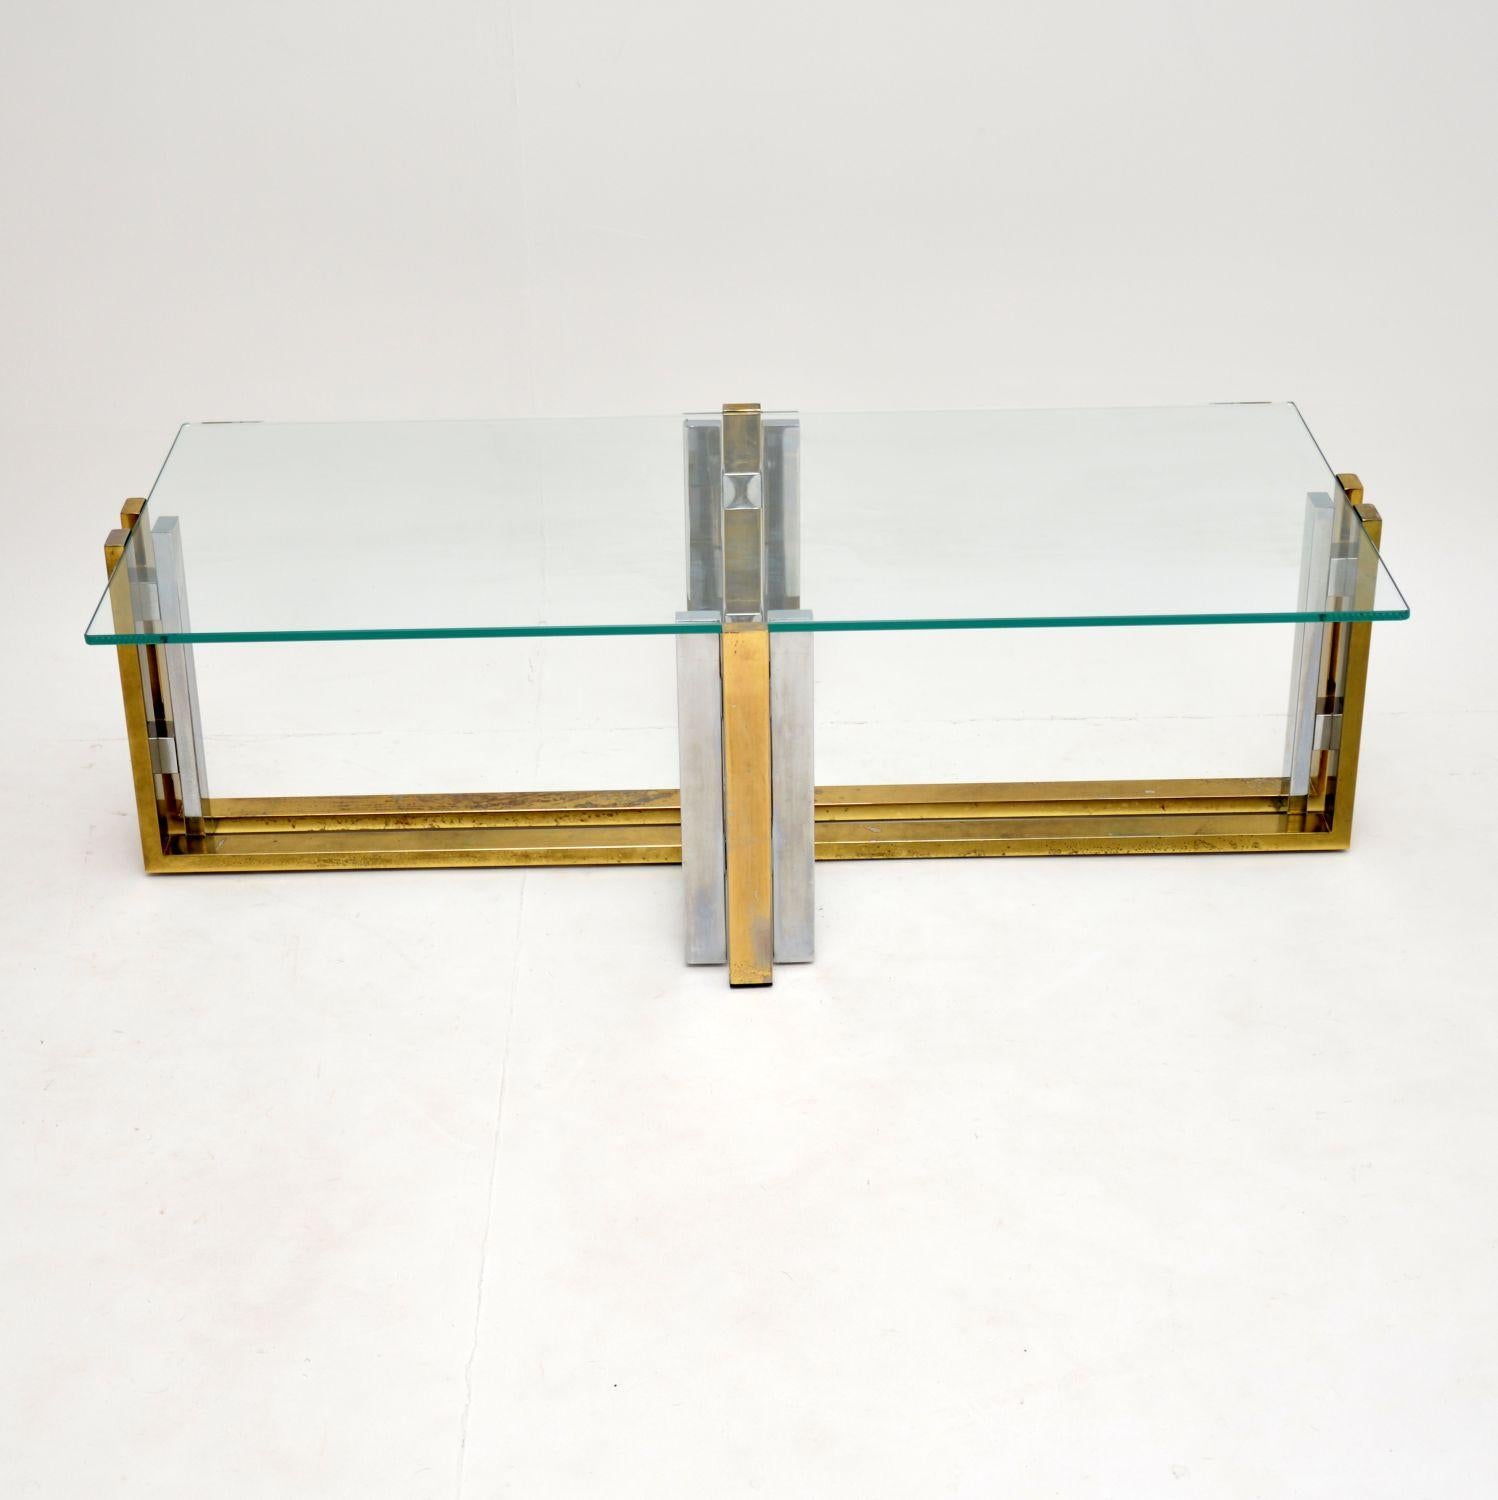 A stunning vintage coffee table dating from the 1970s. It has a beautifully designed frame made from brass and chrome plated steel.

We have had the toughened clear glass top newly made, so that is in perfect condition. The frame is clean, sturdy